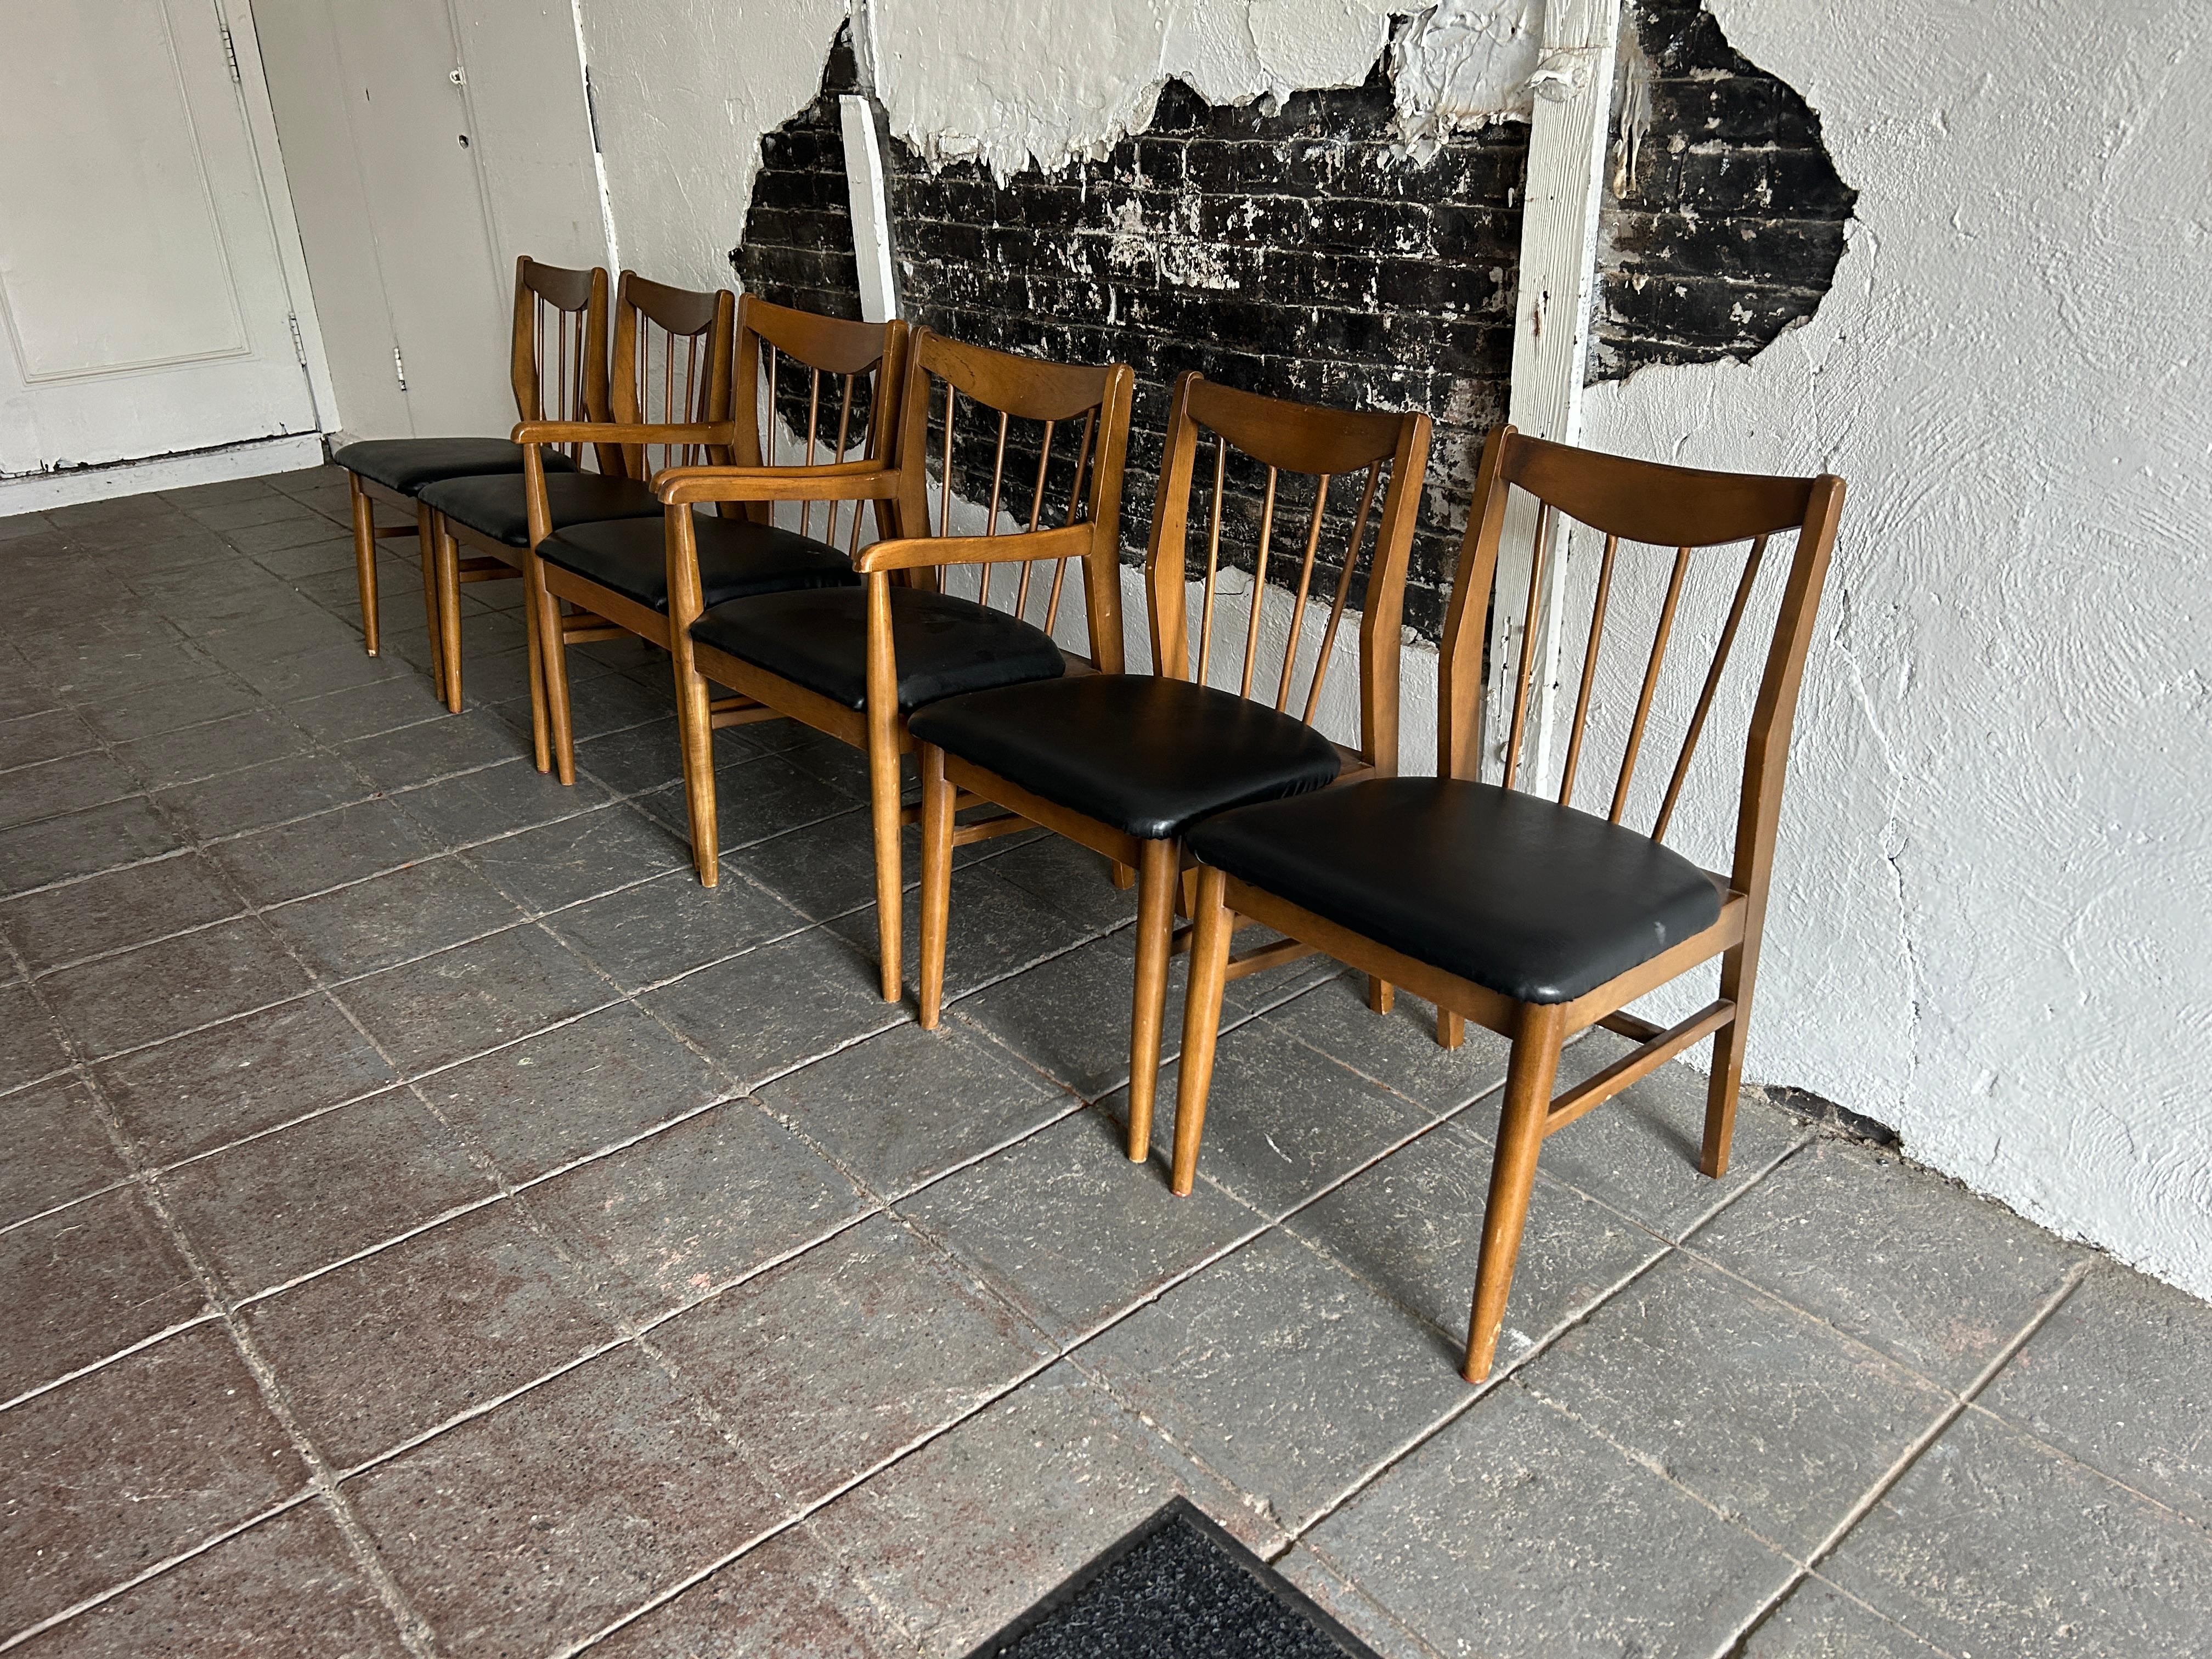 Set of 6 mid century spindle back American modern walnut dining chairs black vinyl Upholstery seat cushions. Great set of dining chairs ready for use or very easy to have reupholstered. Solid wood construction with walnut finish. (2) arm chairs and